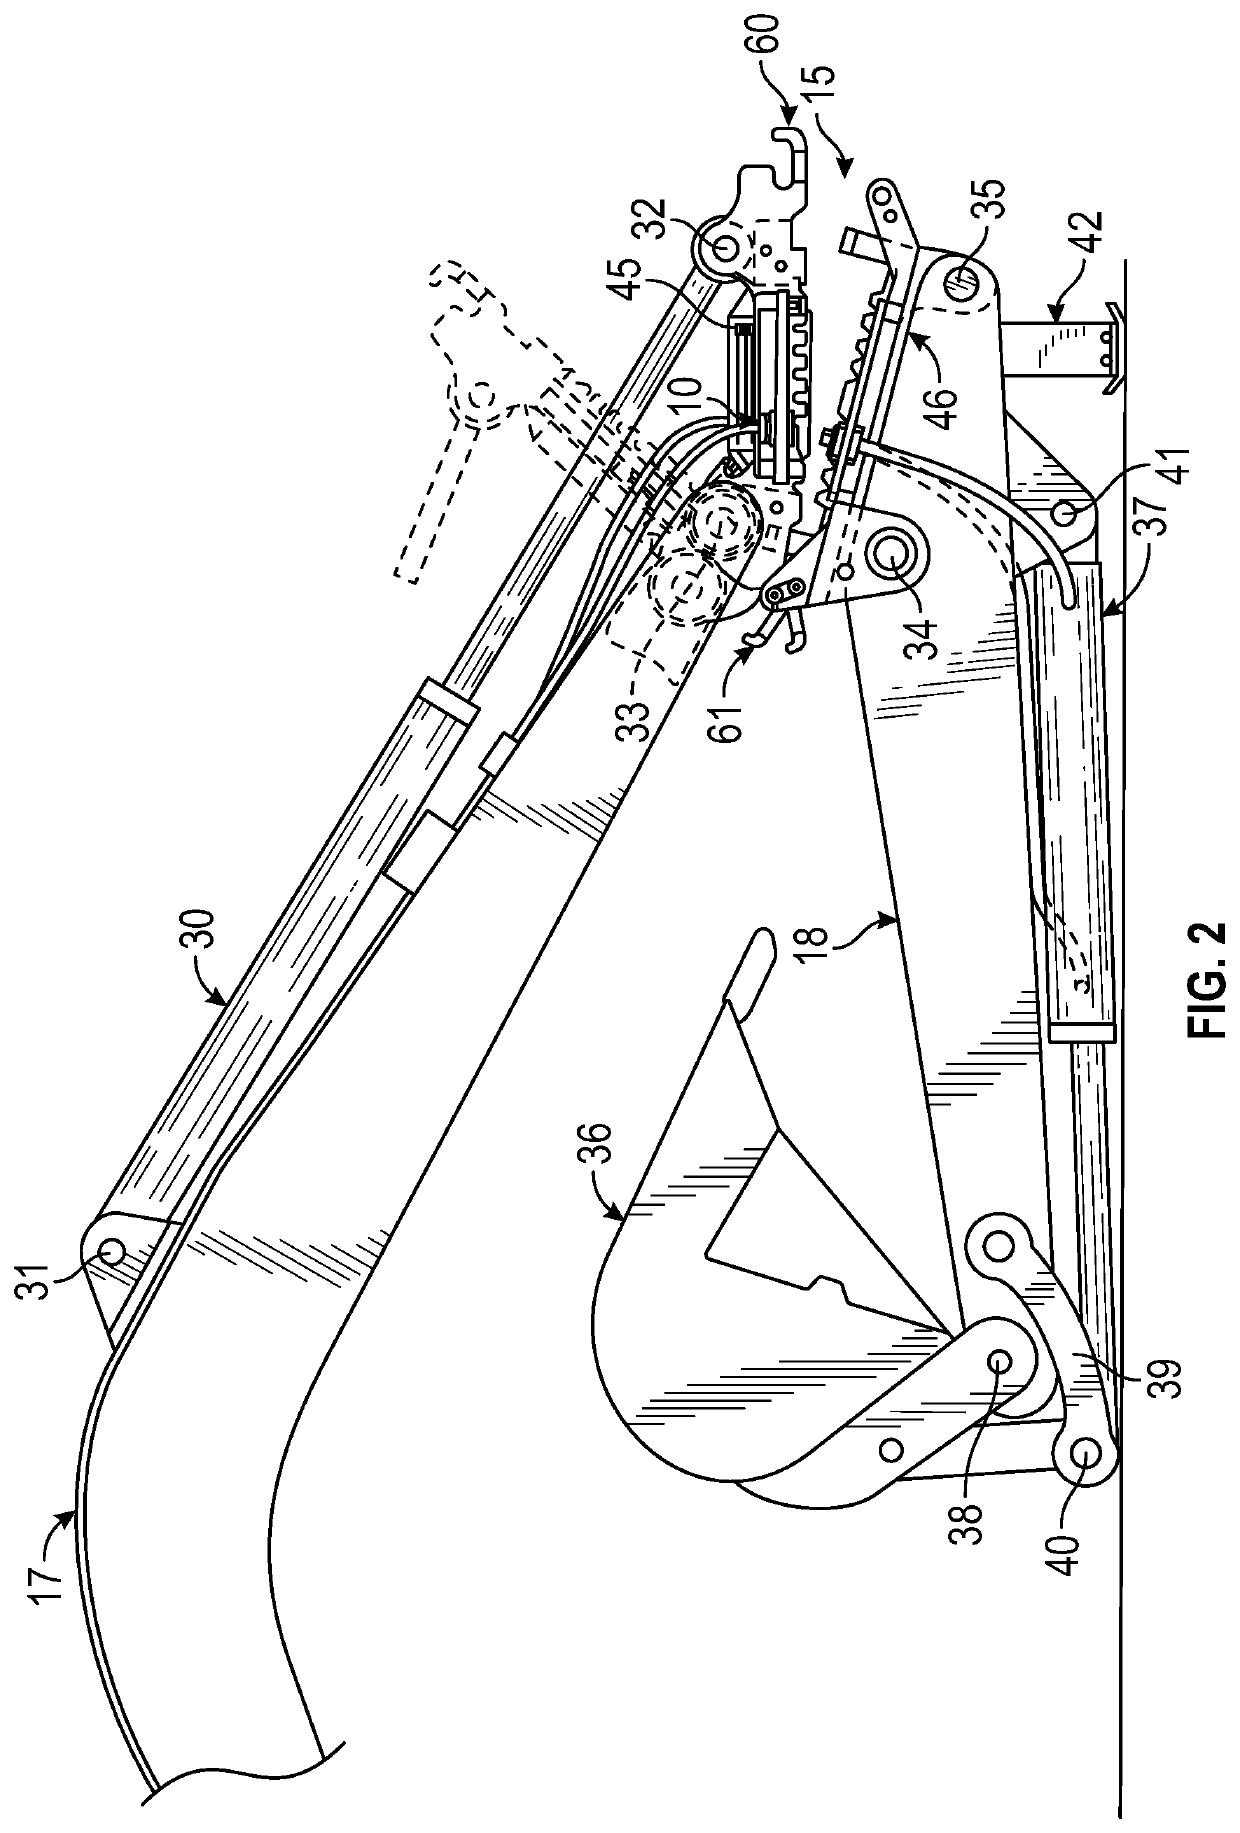 Device to couple members of a heavy-duty machine